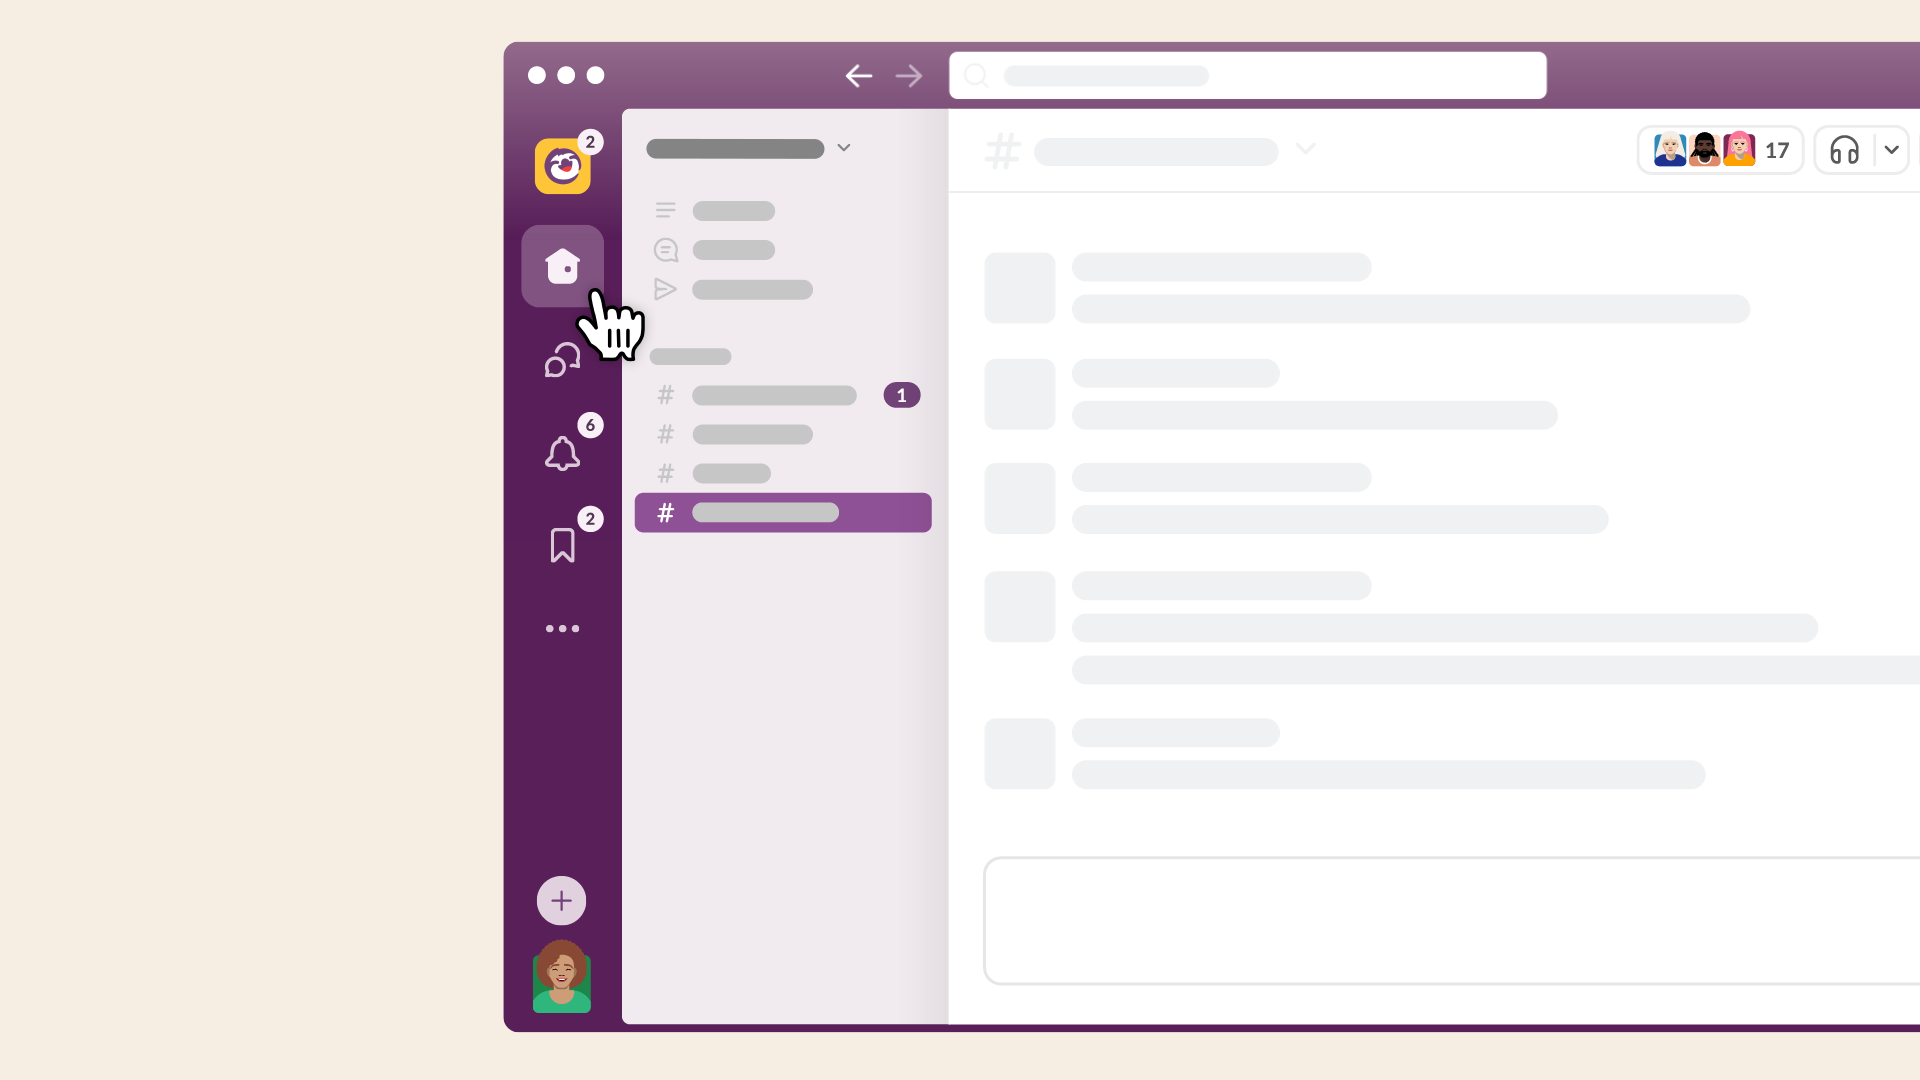 View of the Slack interface, including the search bar, plus button, and profile picture